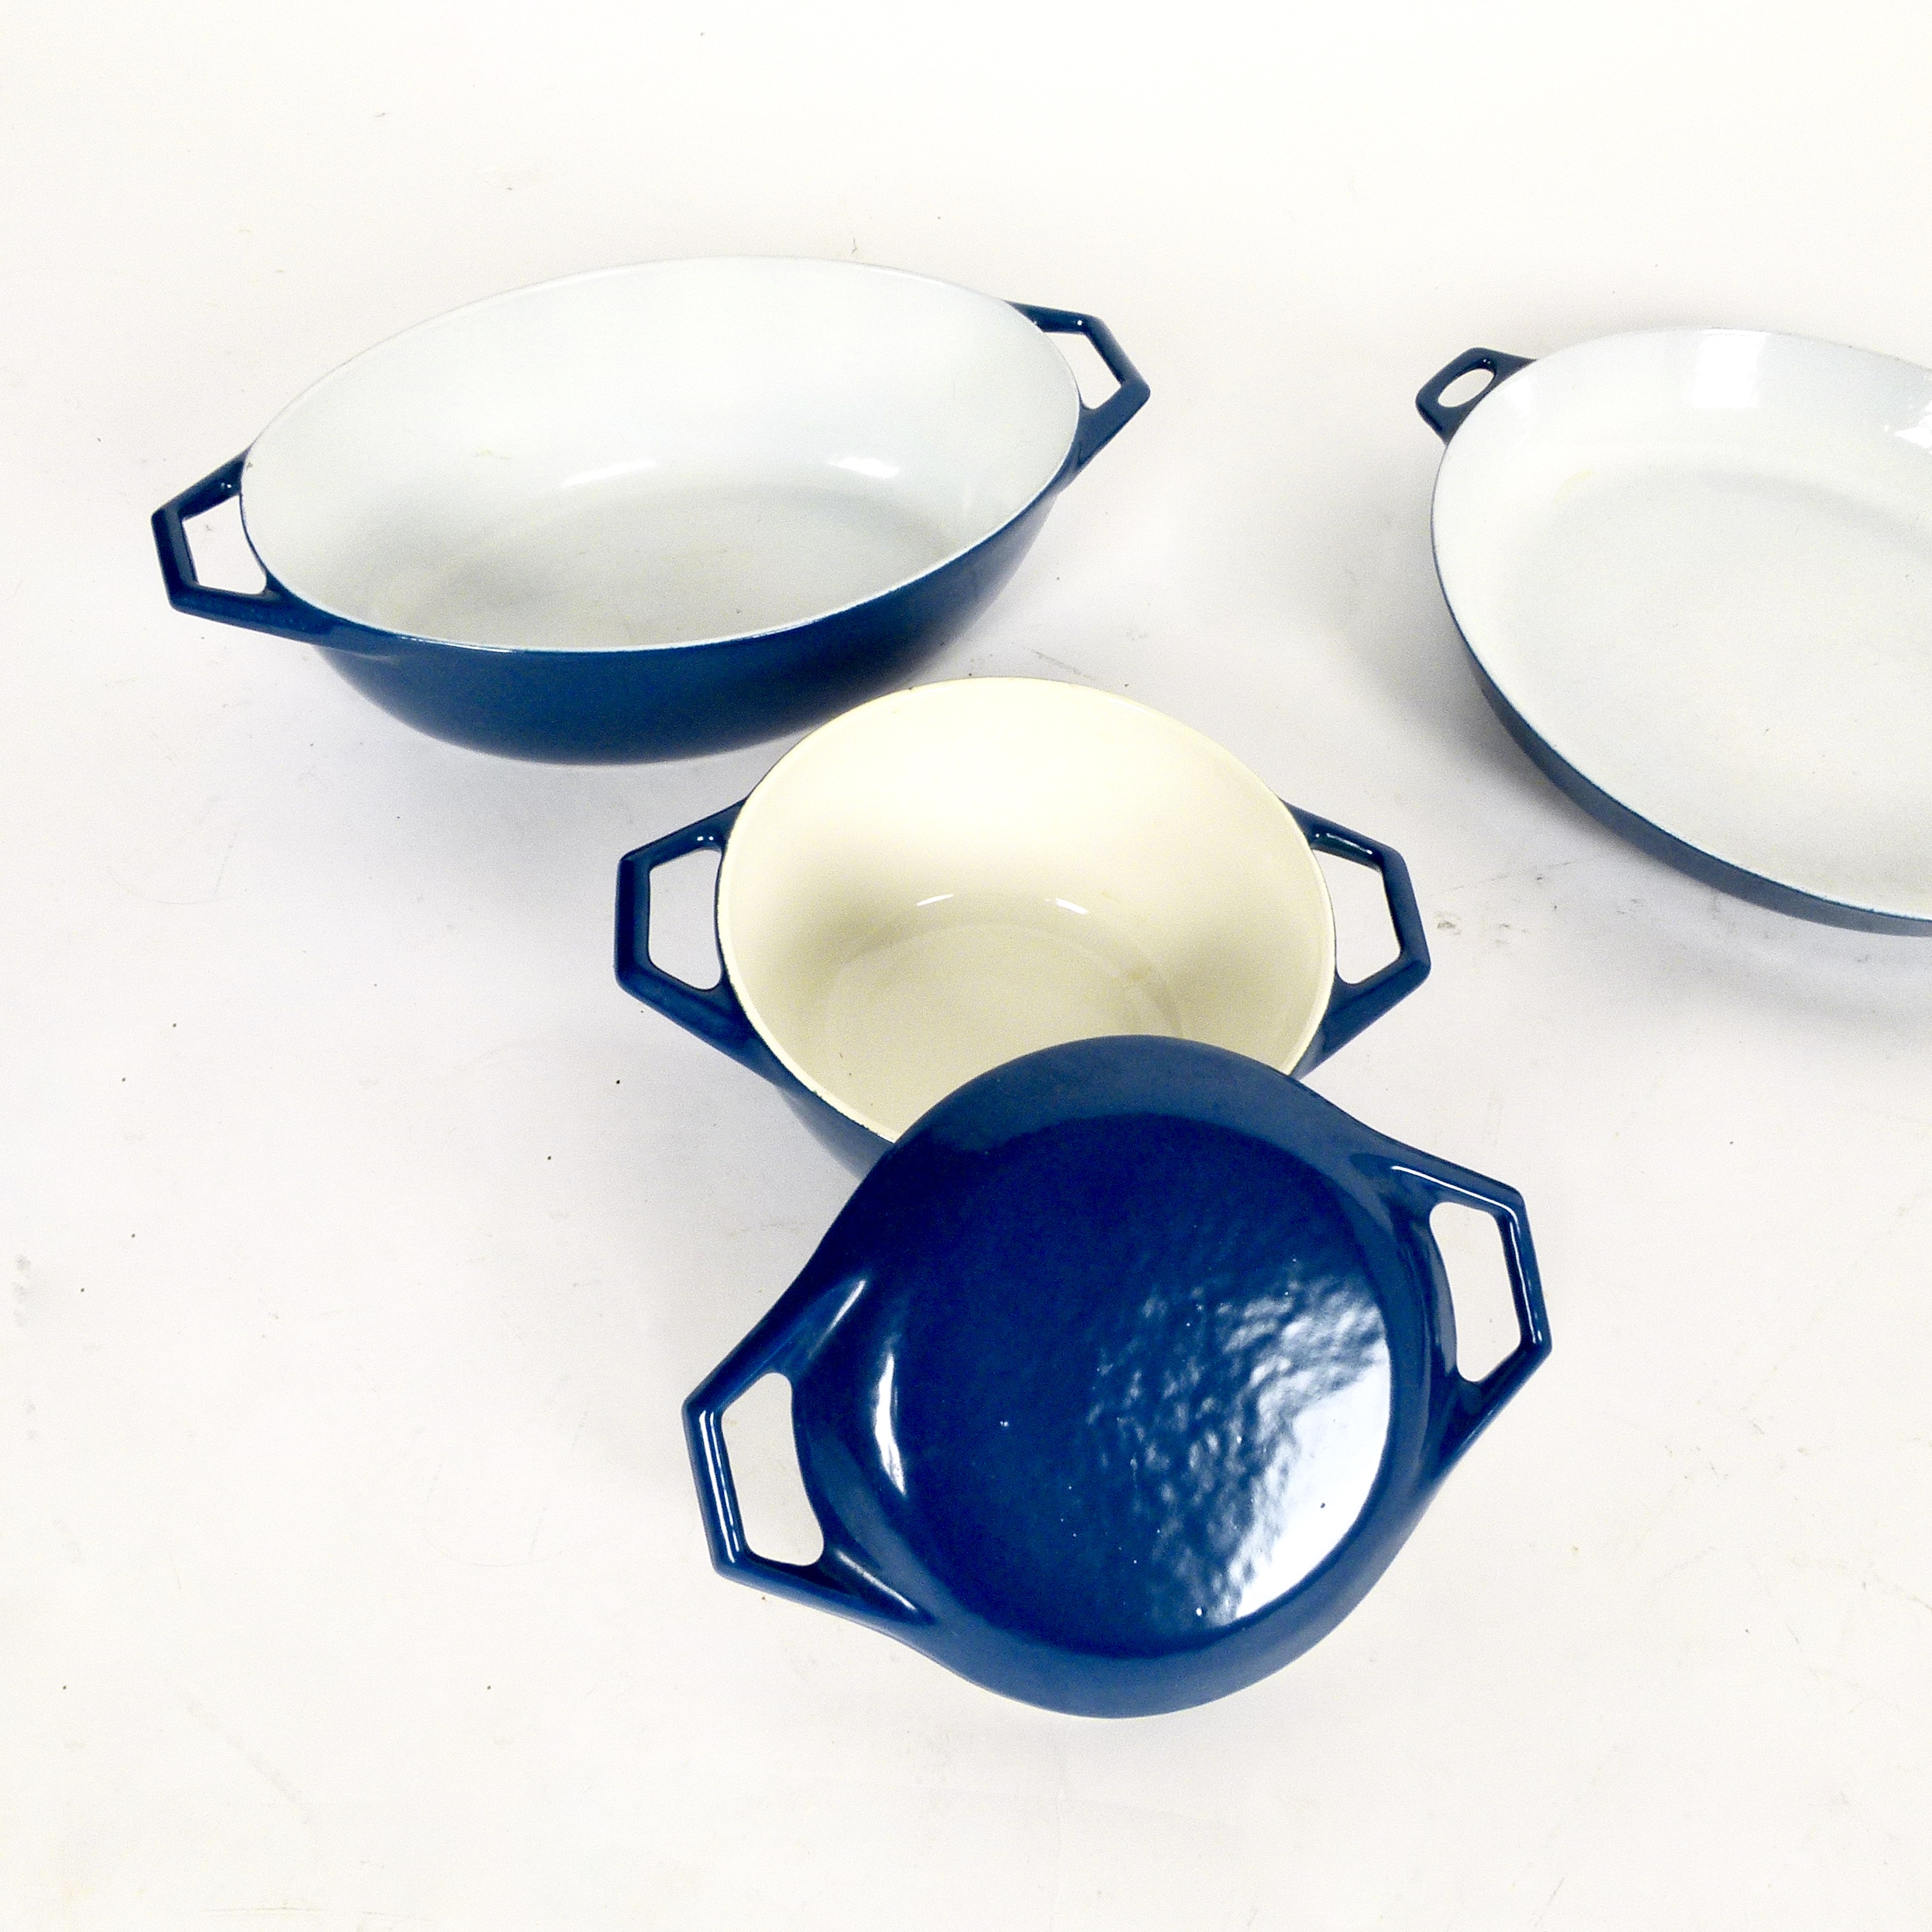 Sold at Auction: Vintage Copco Denmark Iron Enamel Cookware